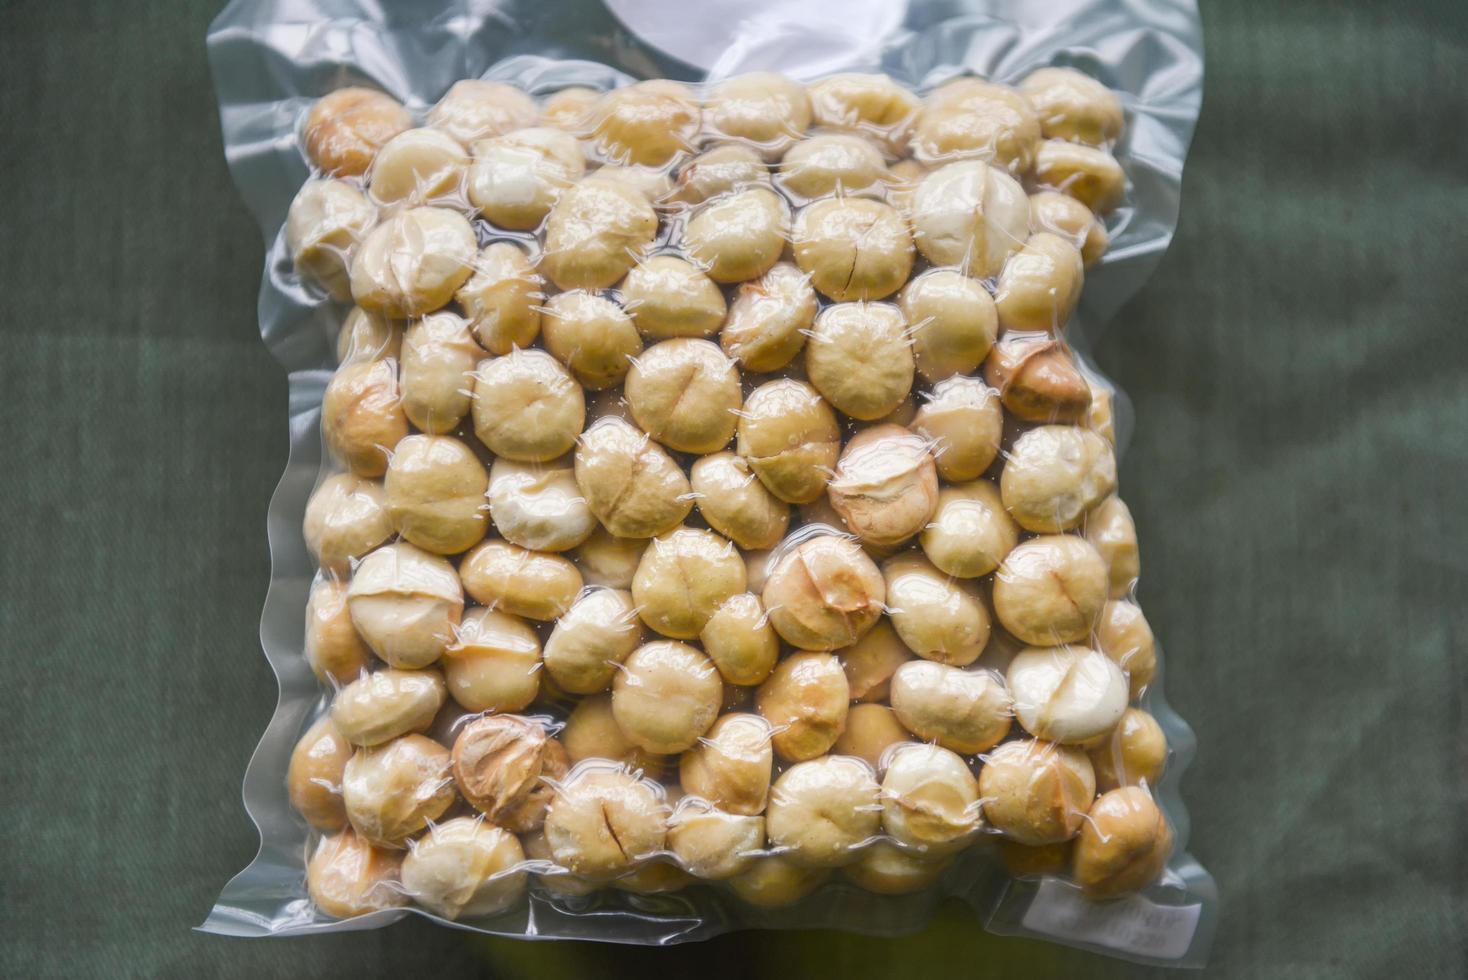 Macadamia nuts in vacuum packaging macadamia nut shelled from natural high protein for to drying photo